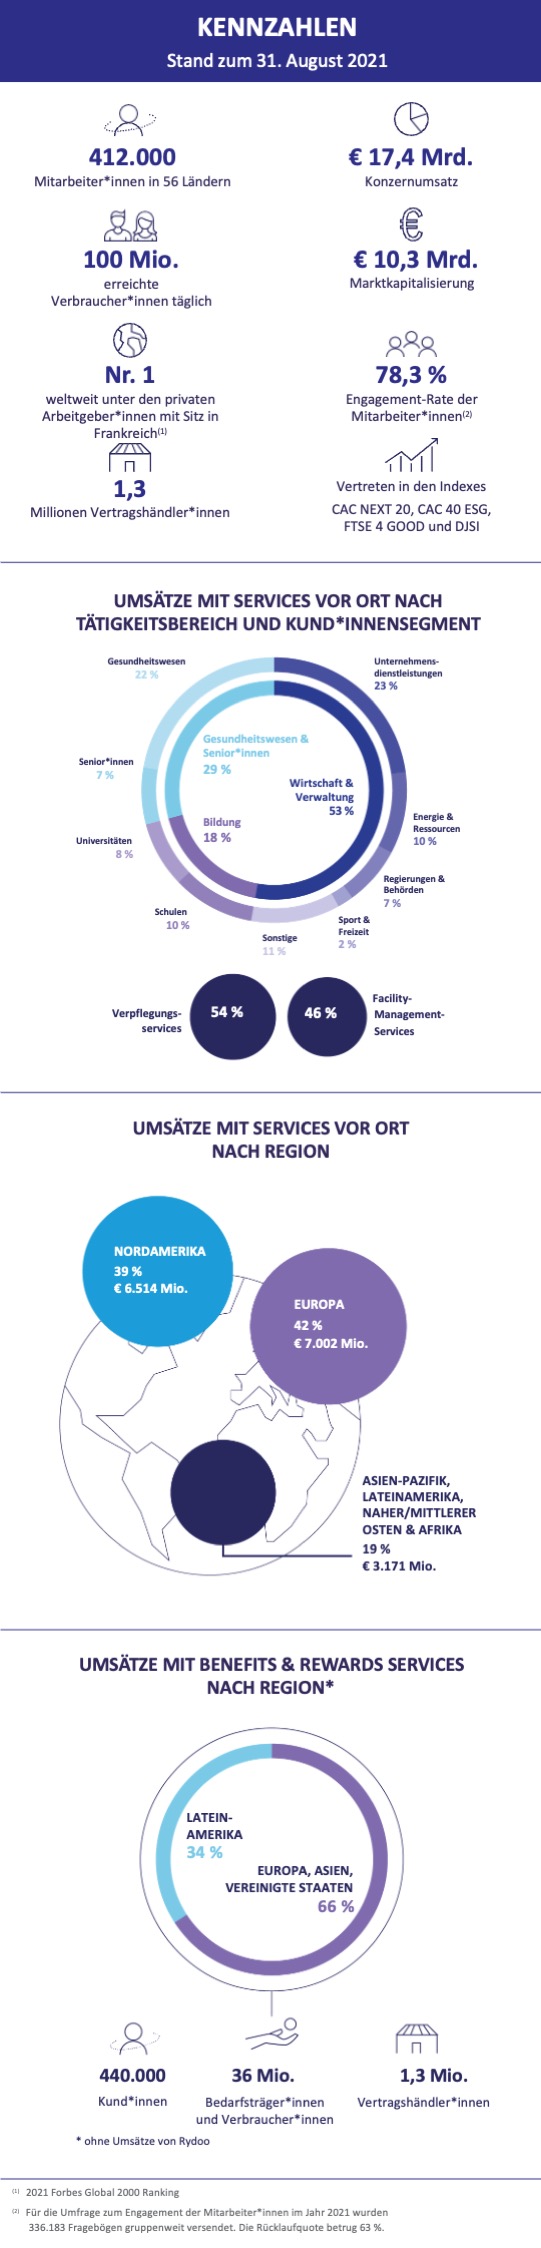 Sodexo key figures infographic, accessible version below